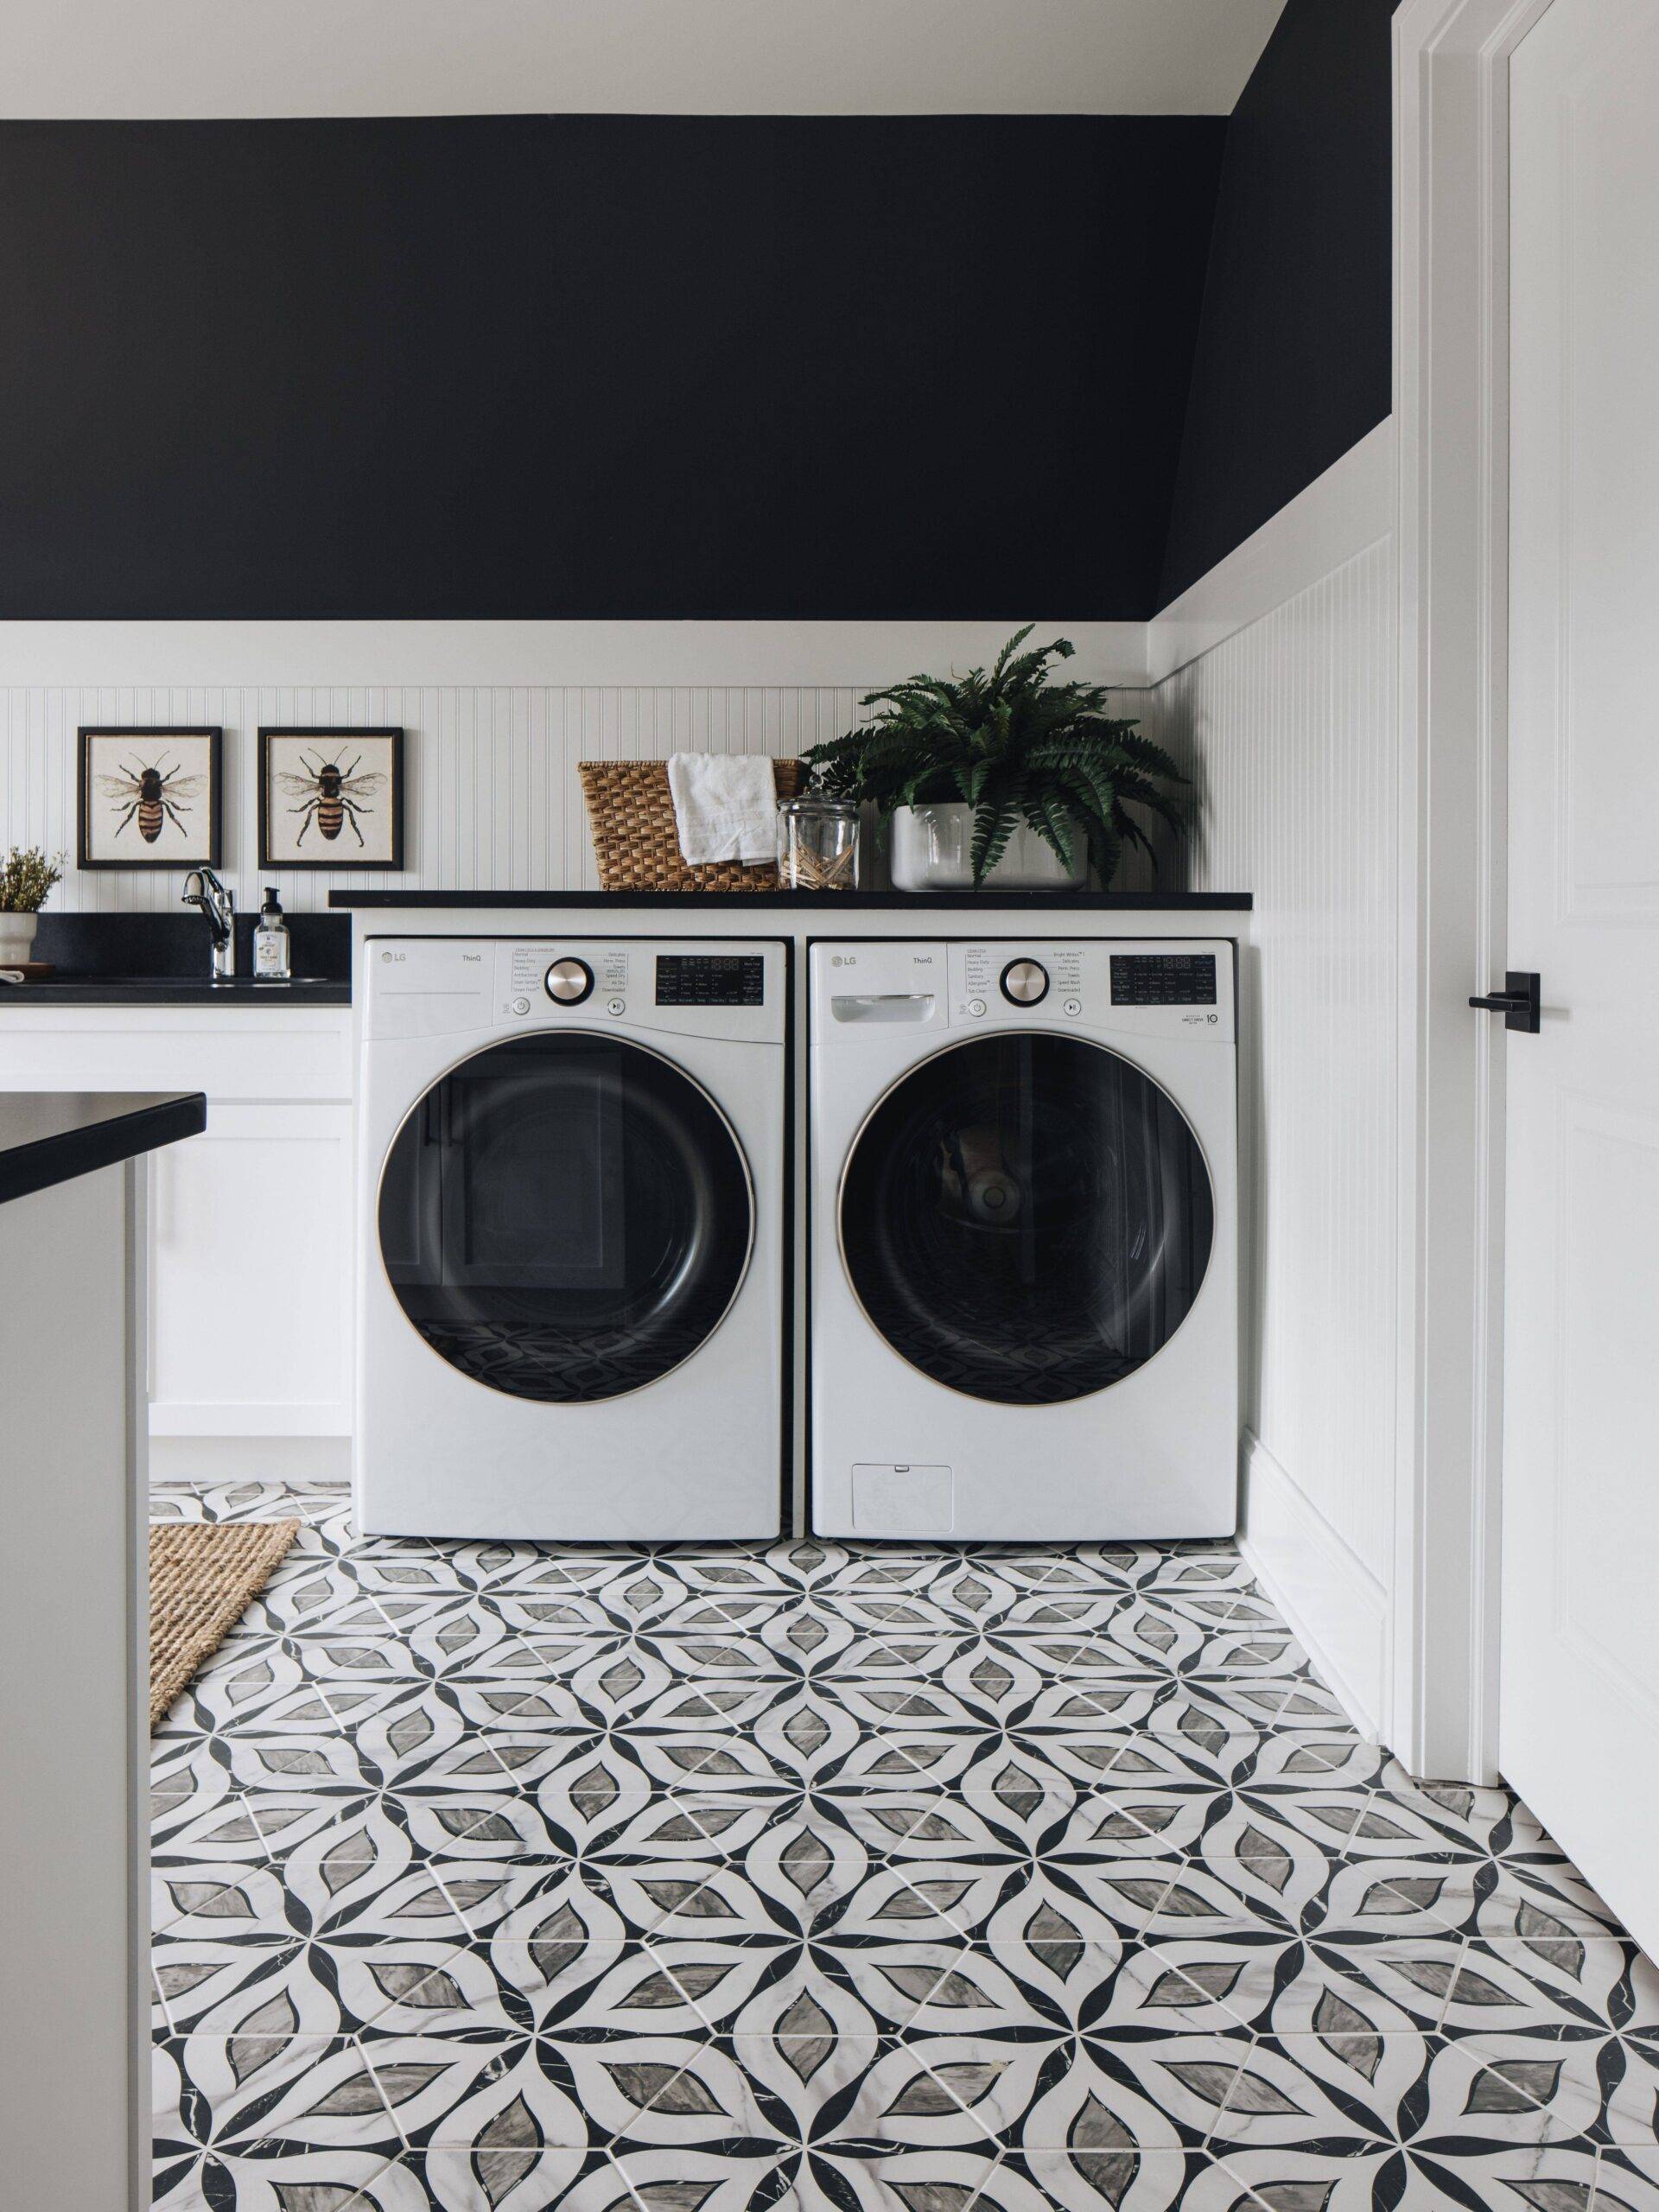 Laundry room with floral-patterned grey, white and black hexagon-shaped tile floor.